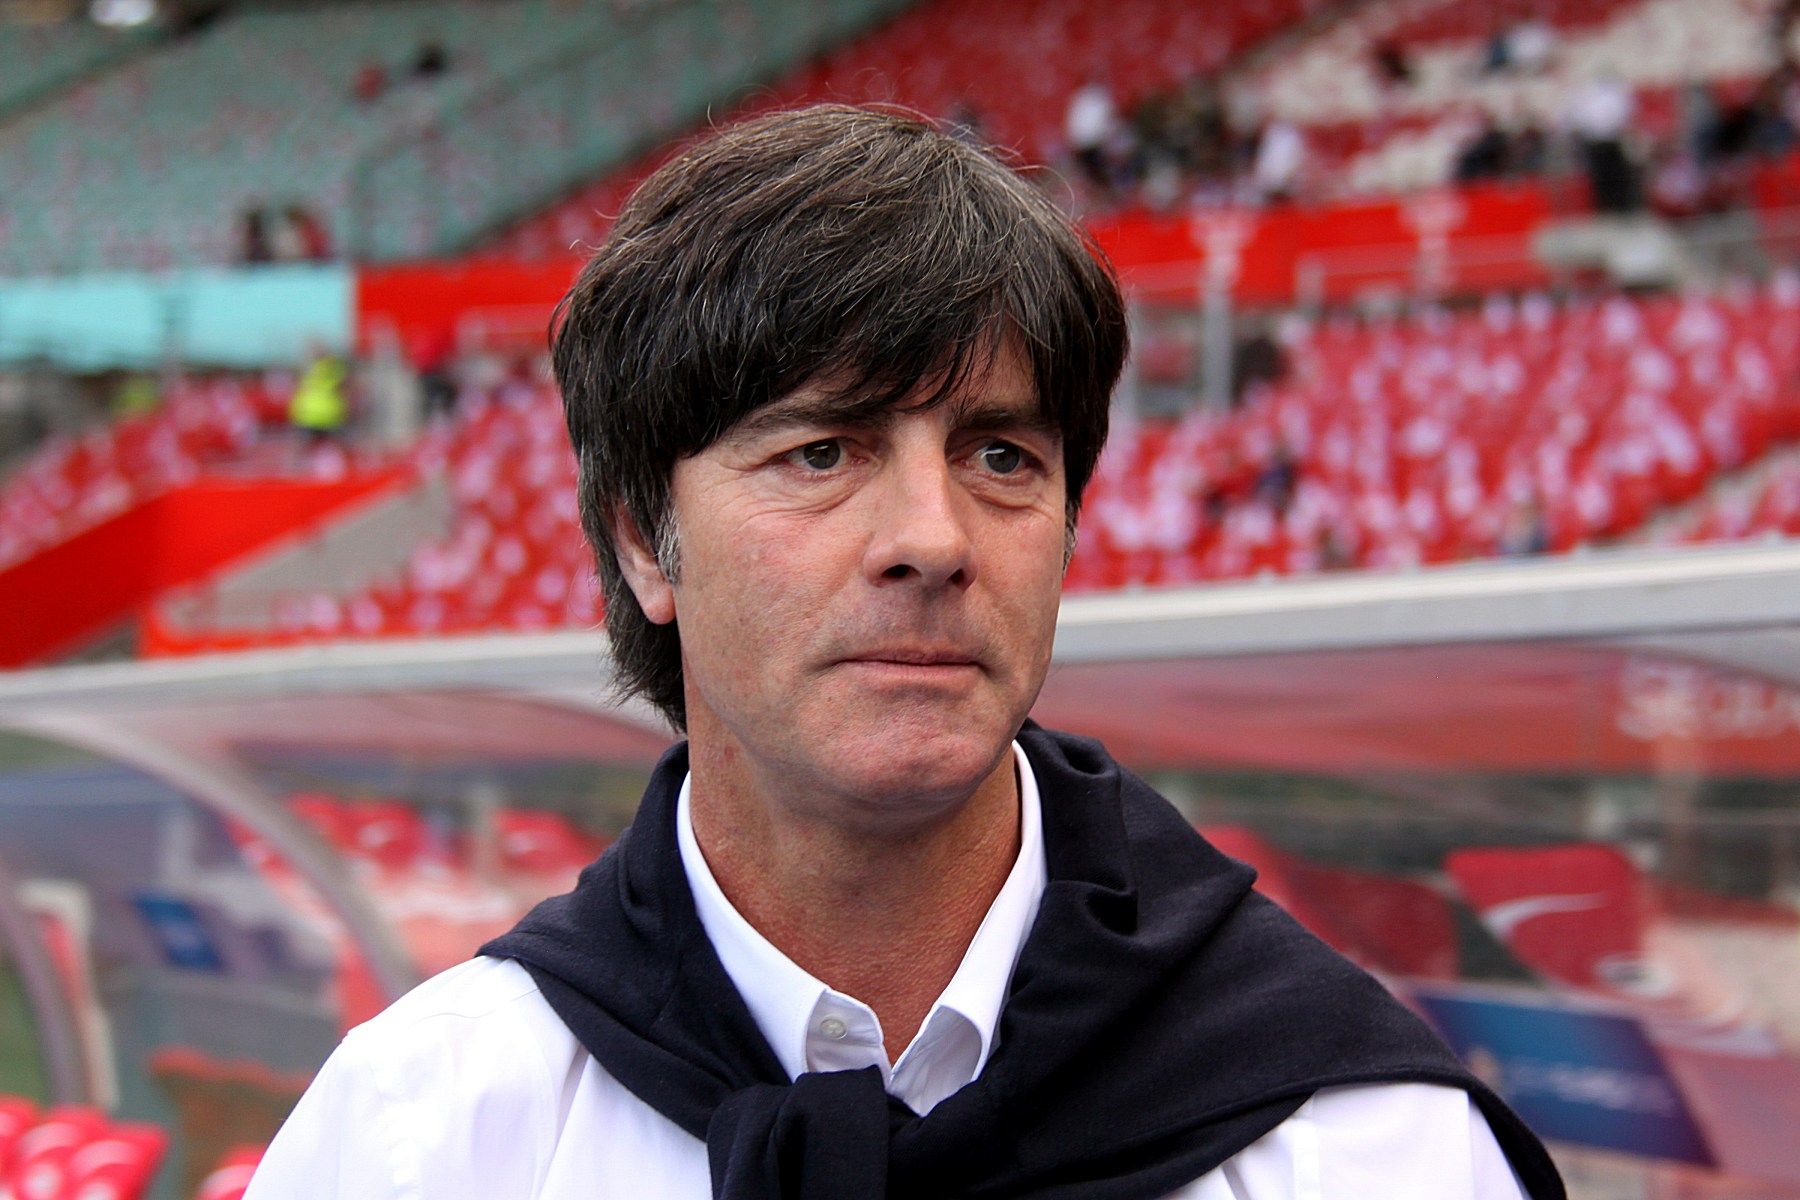 J. Löw (Joachim Löw) Biography, Date Of Birth, Career, Achievements, Goals And Many More..., J. Löw (Joachim Löw) Biography, Date Of Birth, Career, Achievements, Goals And Many More&#8230;